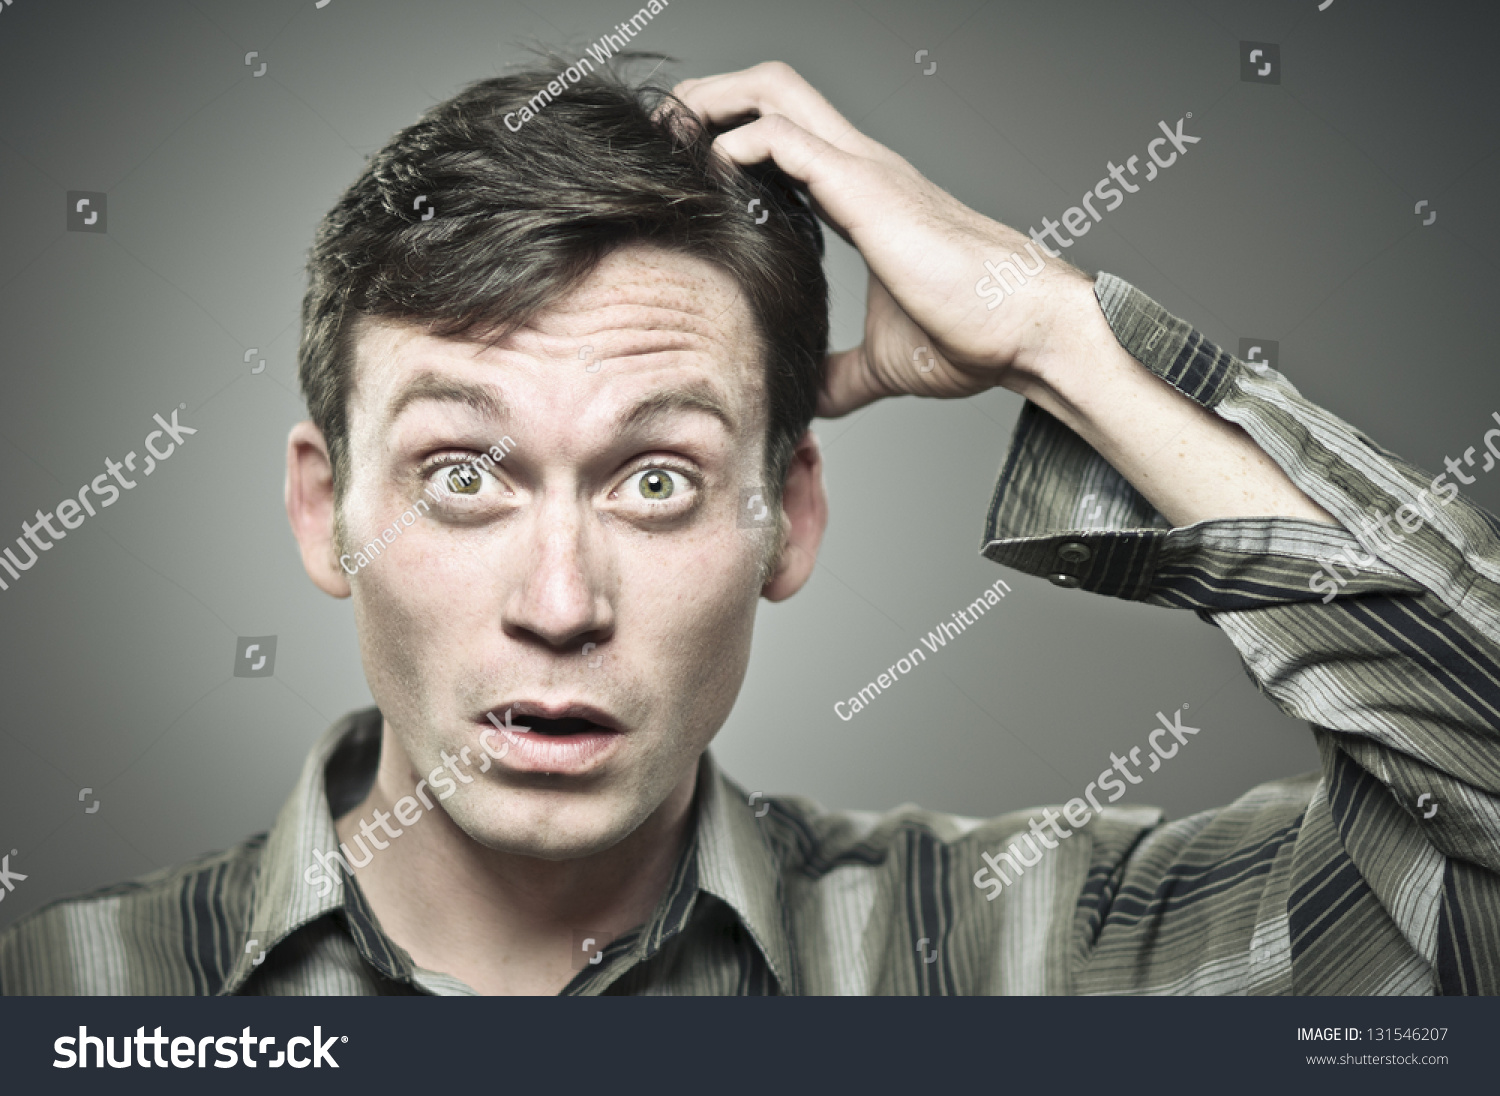 Confused Man Stock Photo (Edit Now) 131546207 - Shutterstock